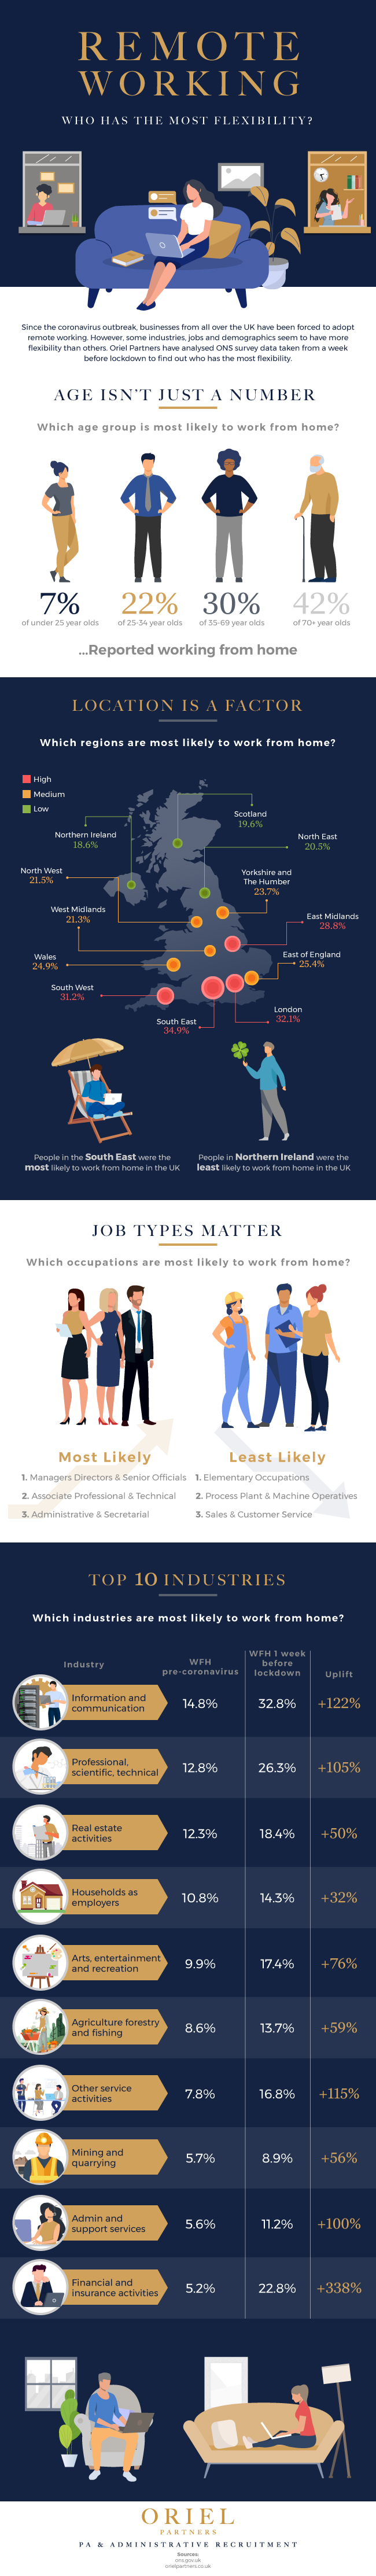 Flexible Industries for Remote workers infographic